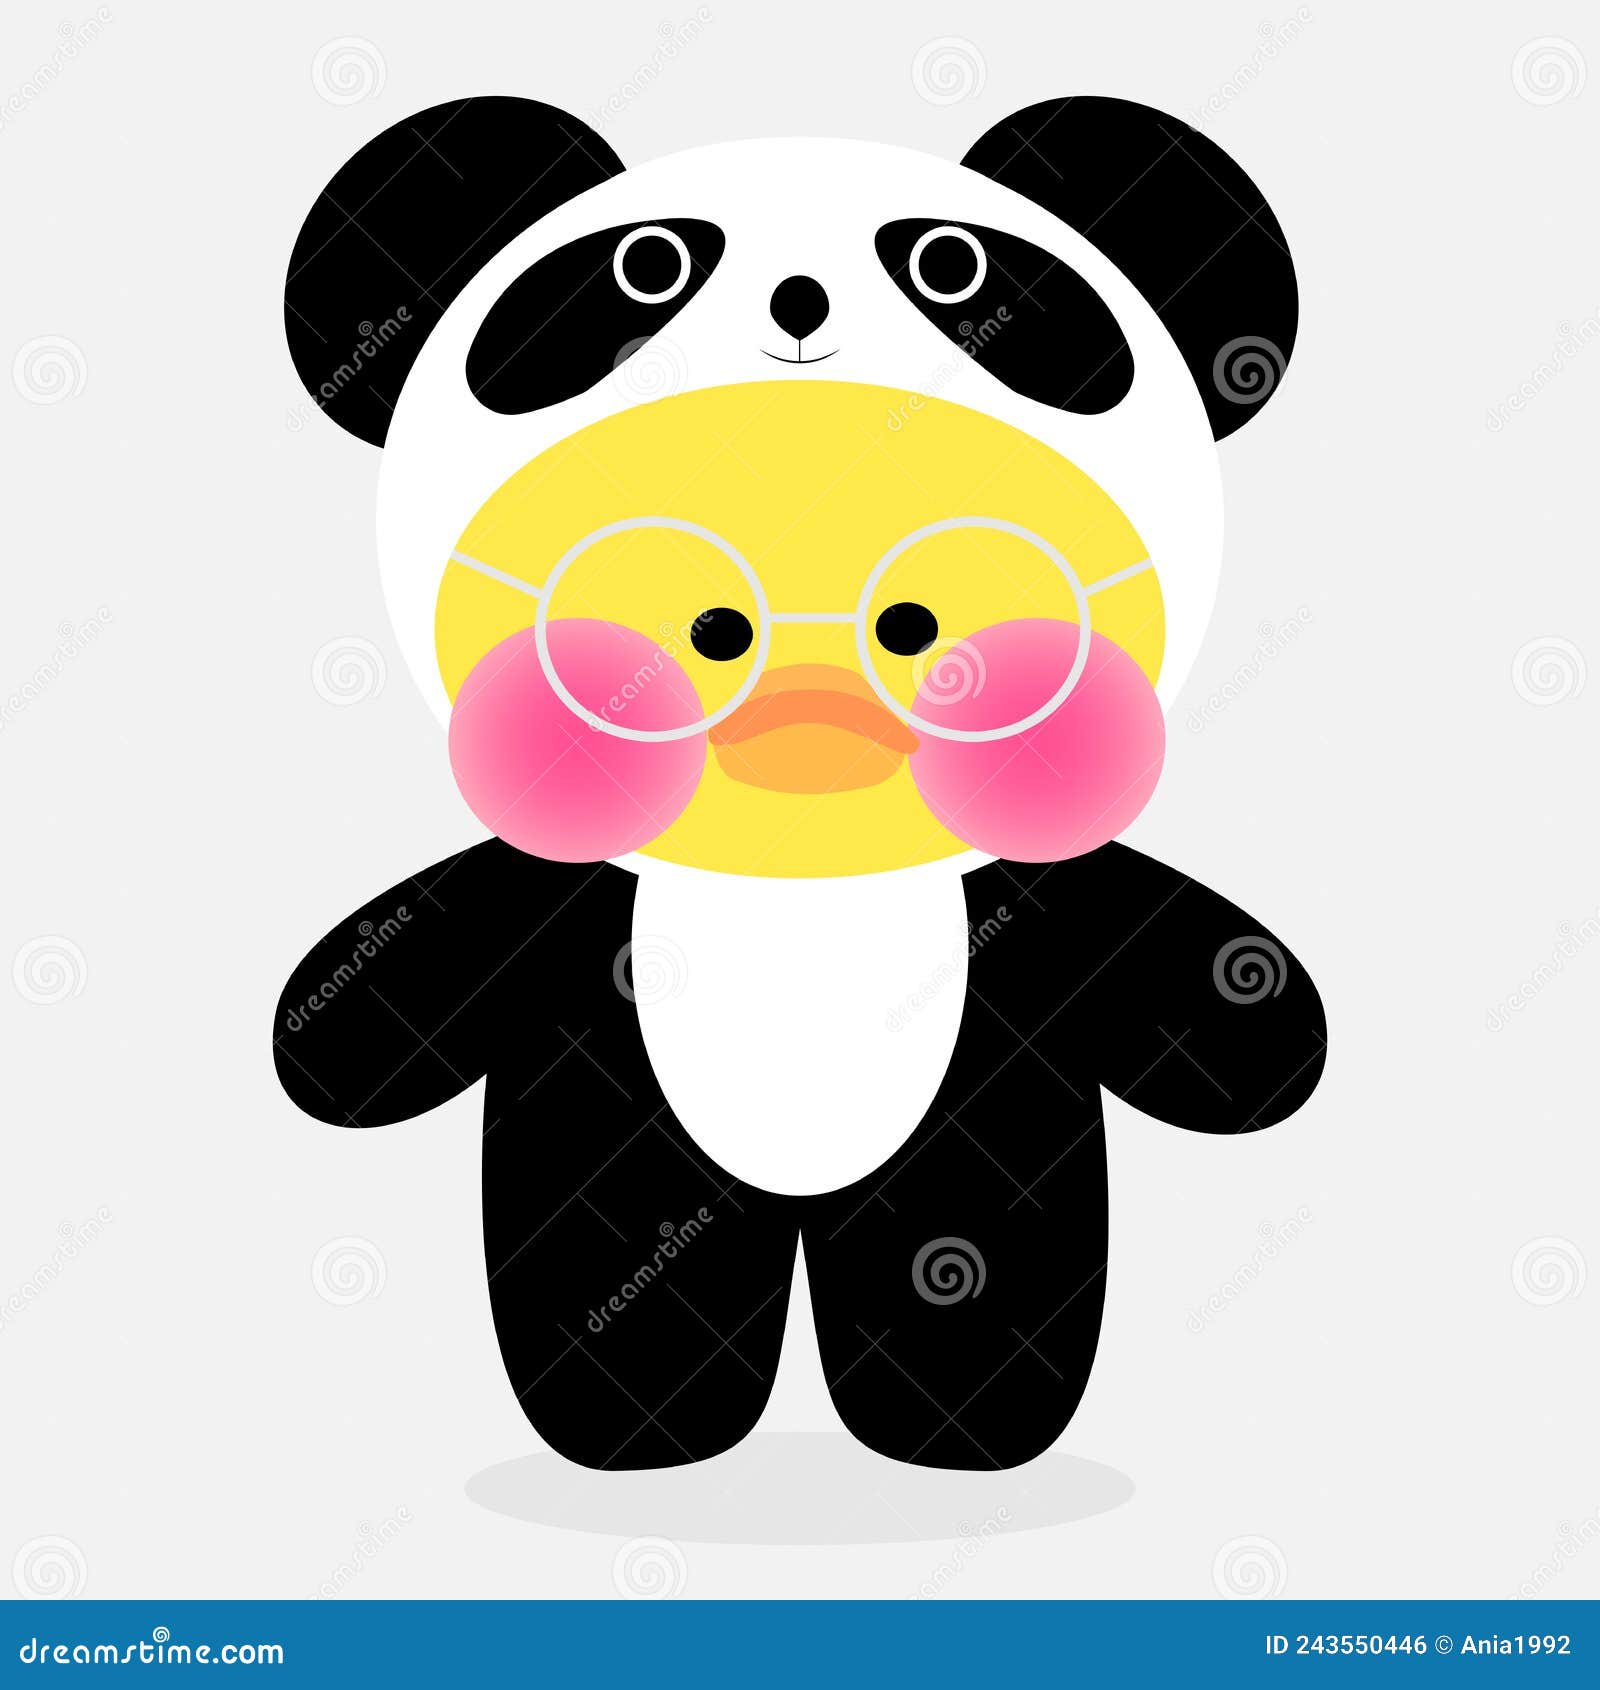 Popular Soft Toy Yellow Duck Boy In A Hat And Bag Lalafanfan Stock  Illustration - Download Image Now - iStock